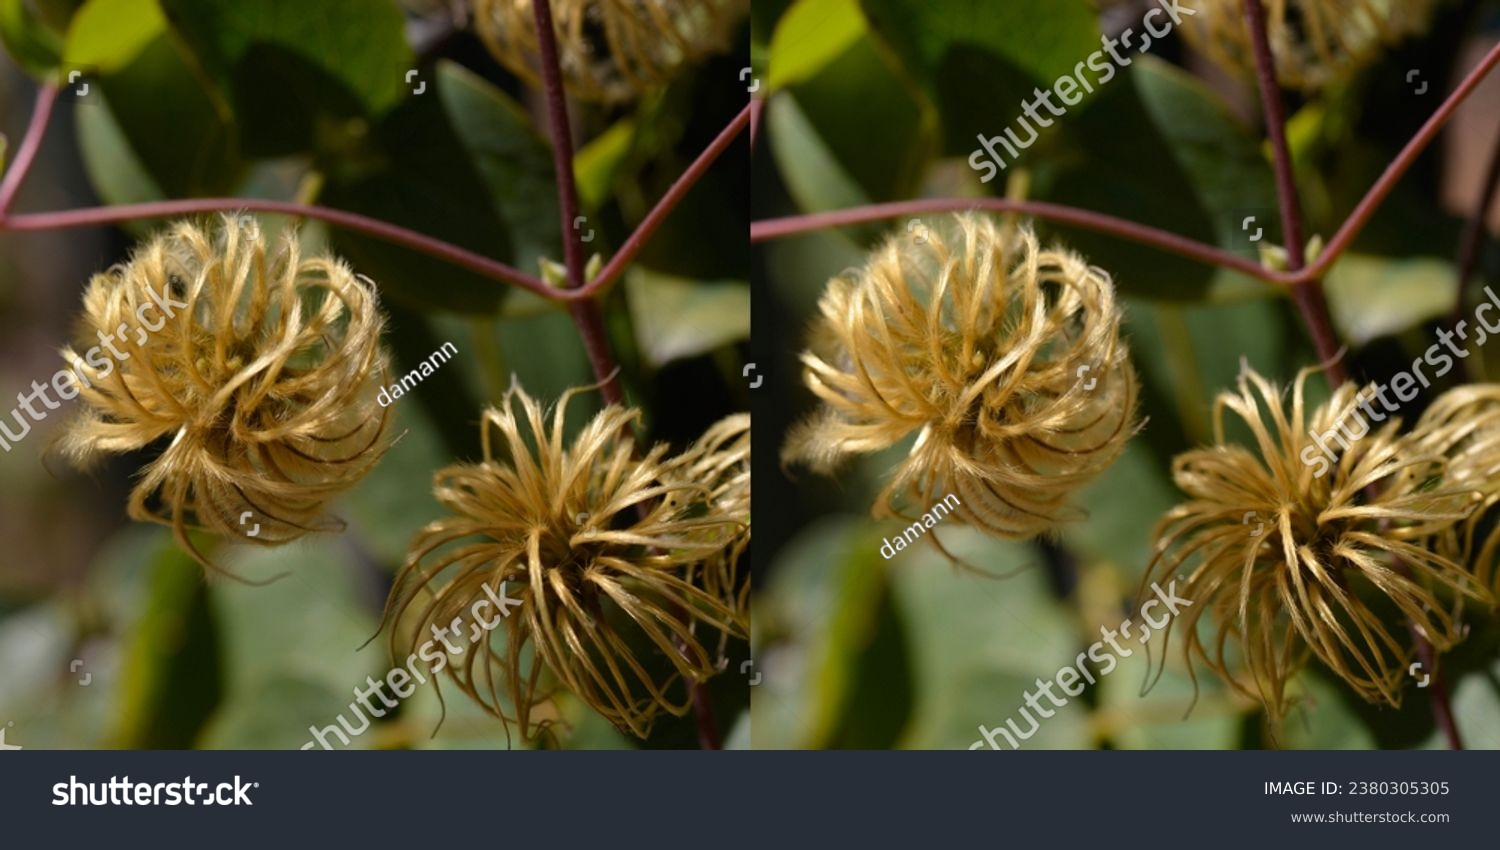 3D Stereoscopic pair of Clematis terniflora (Sweet autumn Clematis) aka Devil’s Darning Needles arranged for cross eyed viewing. Exchange left and right images for parallel viewing. #2380305305